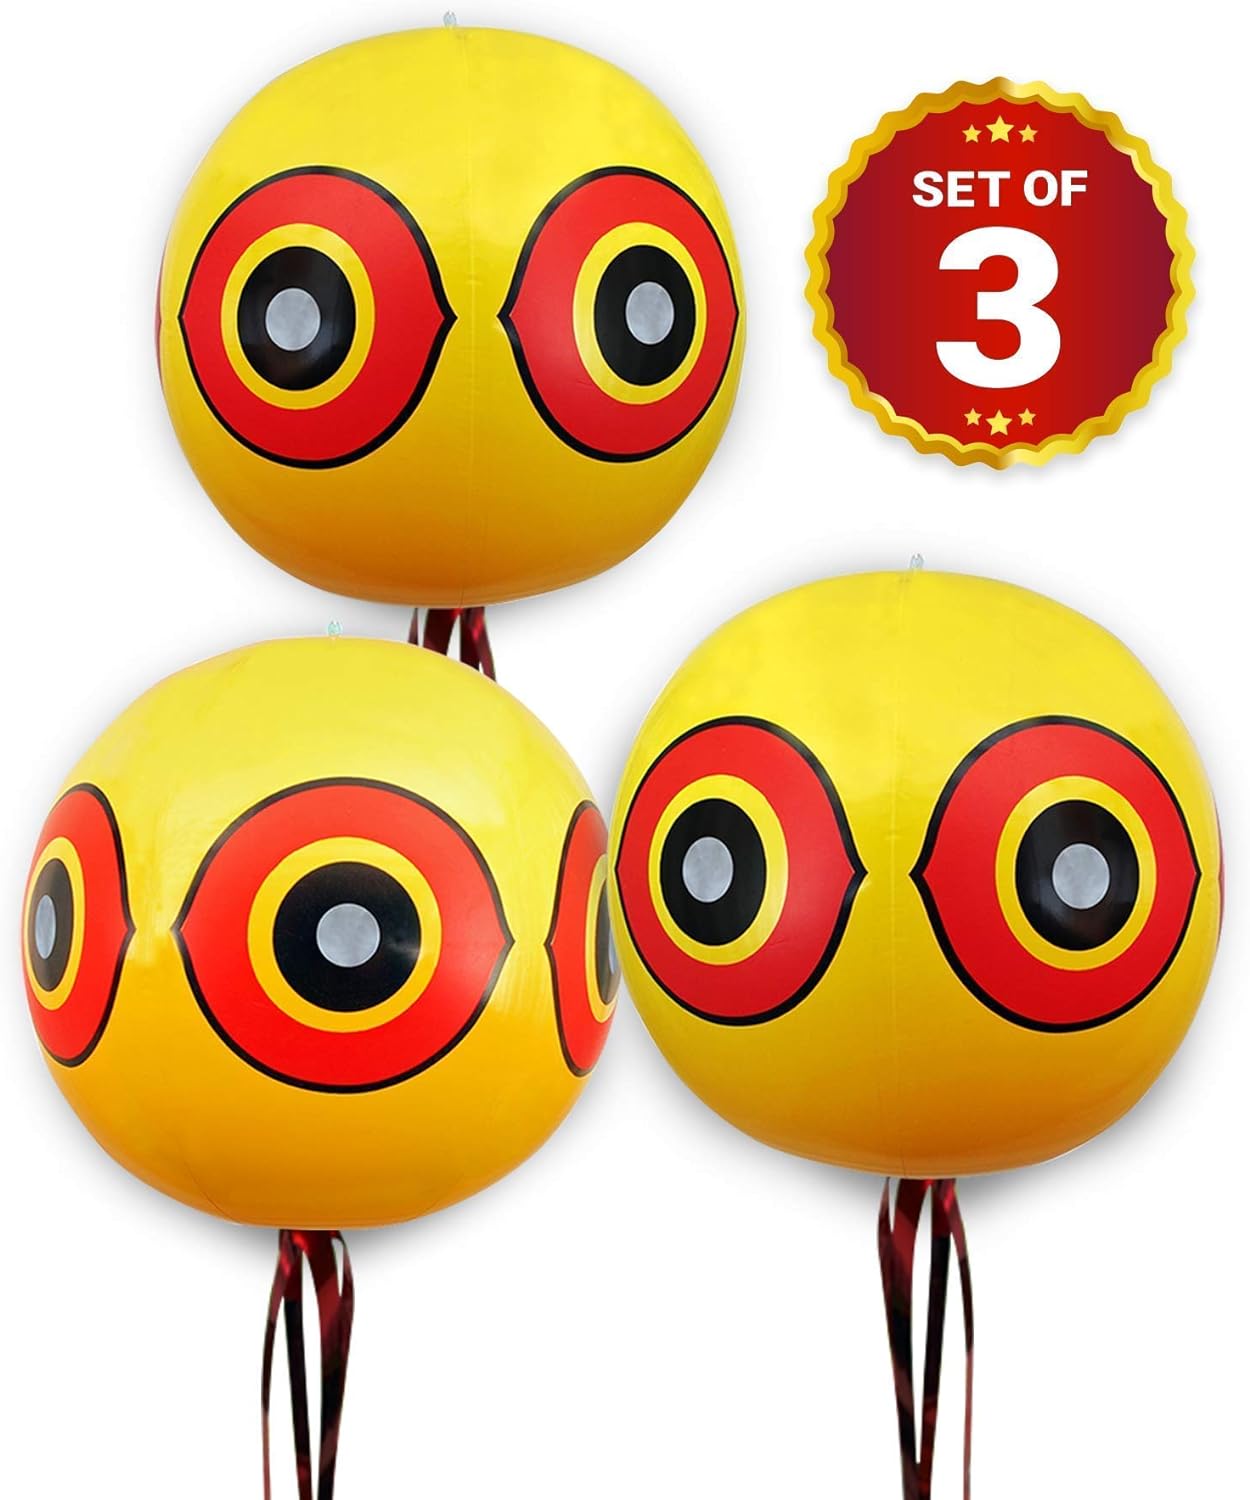 De-Bird Balloon Bird Repellent,3-Pk Fast and Effective Solution to Pest Problems, Scare Eyes Balloon to Scare Birds Away from Pool and Garden Crops?Q7-C18I-ERHI